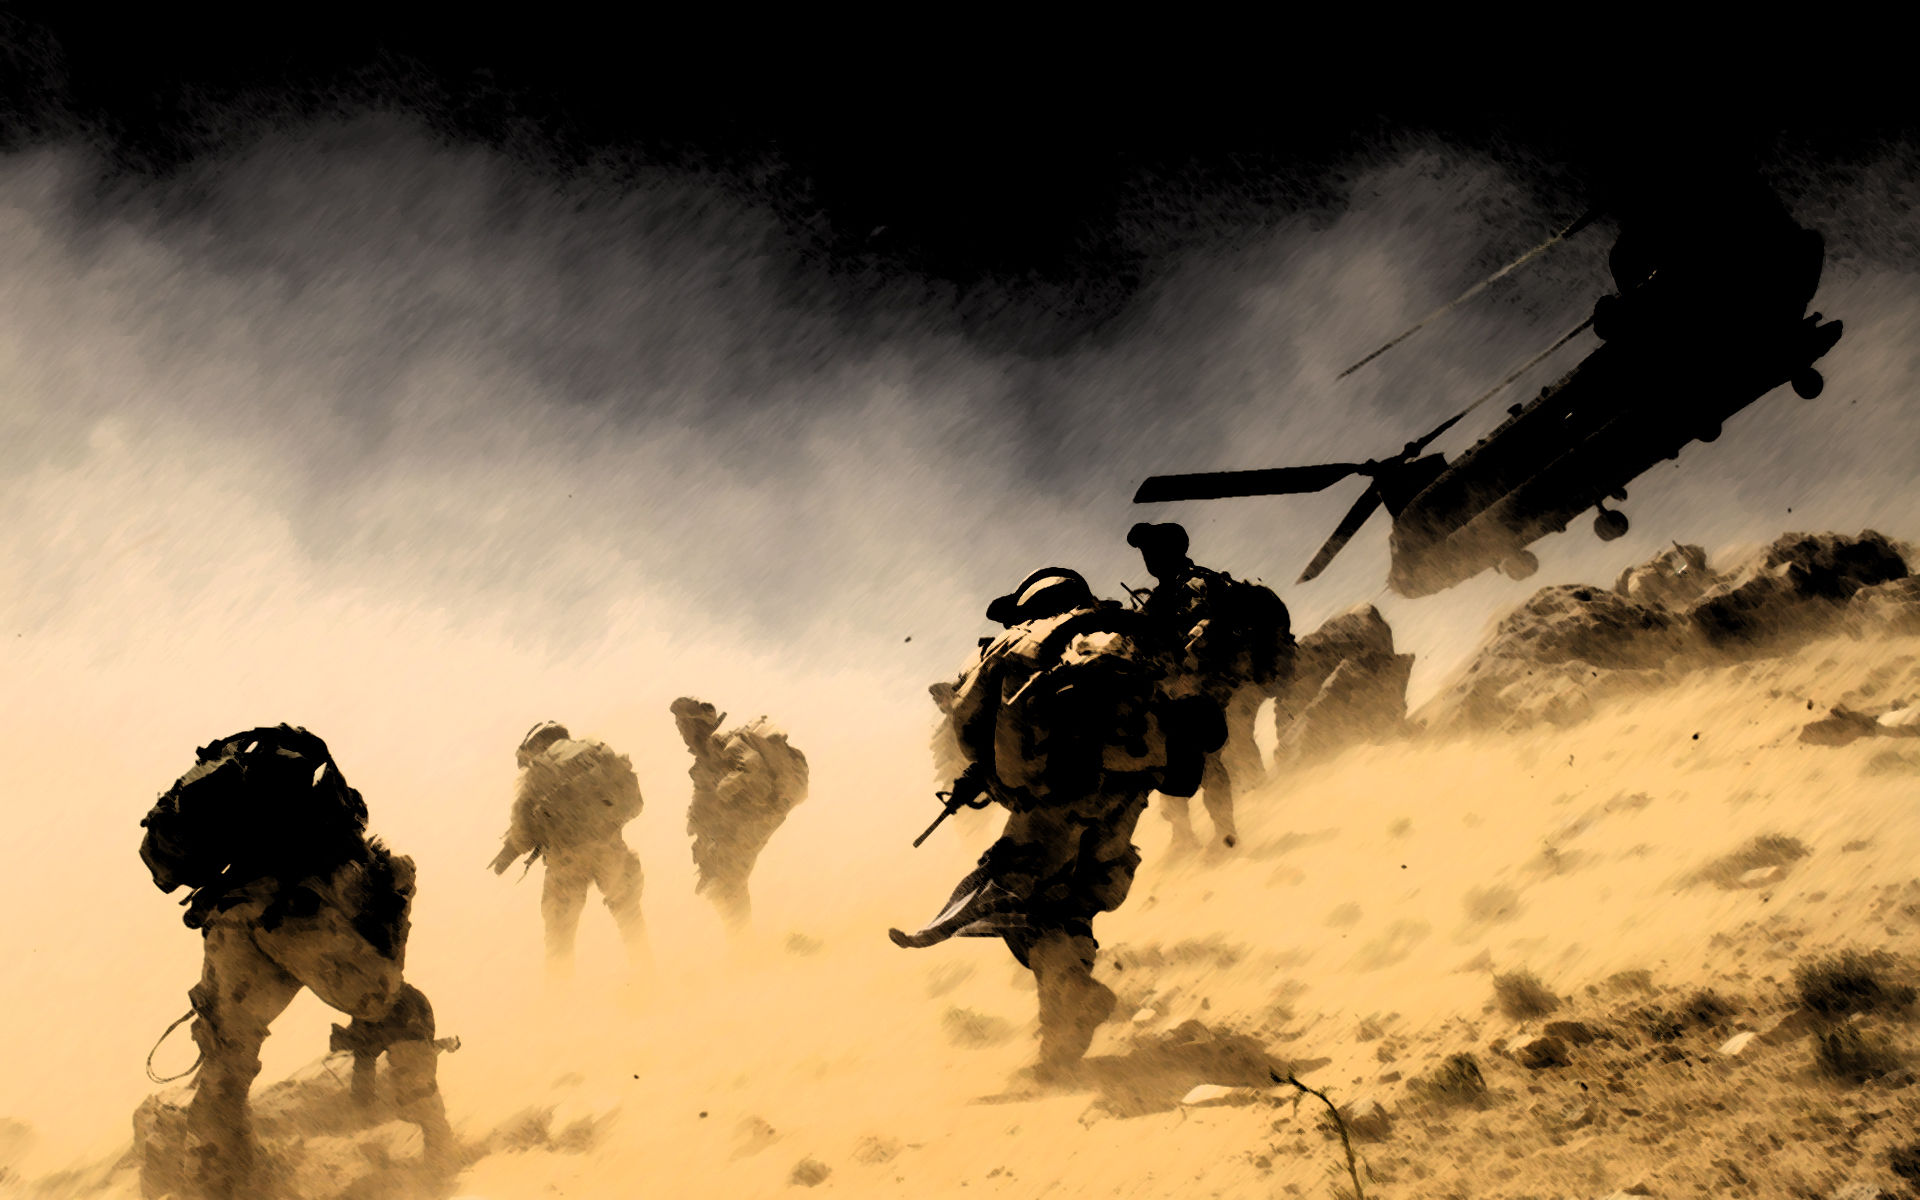  army widescreen high resolution wallpaper download us army images 1920x1200